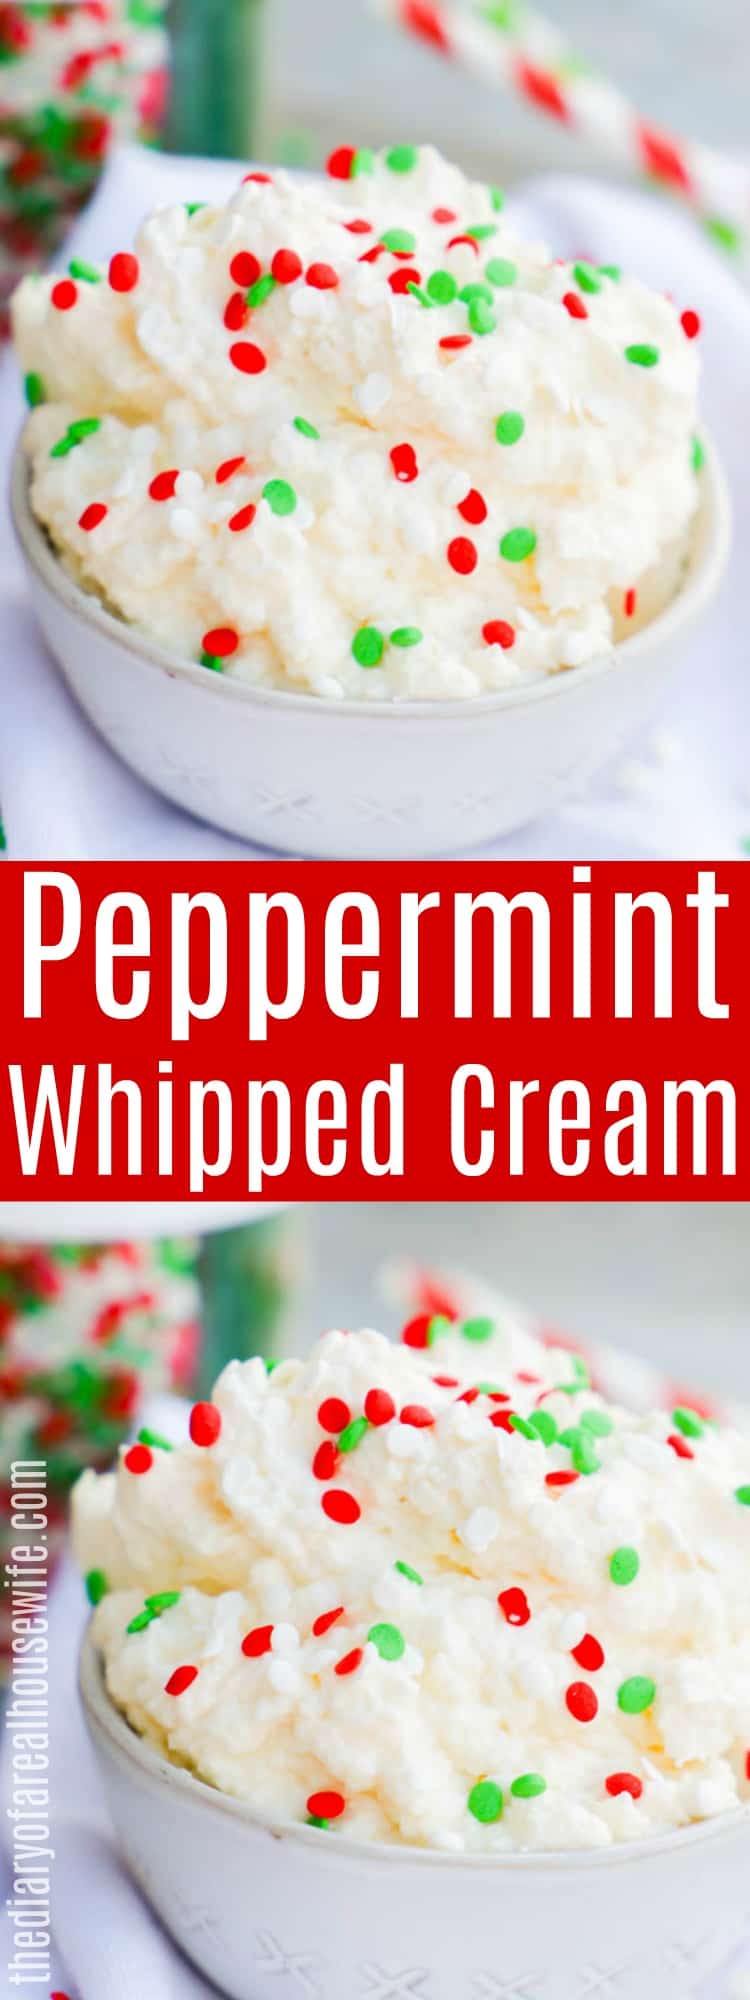 Peppermint Whipped Cream